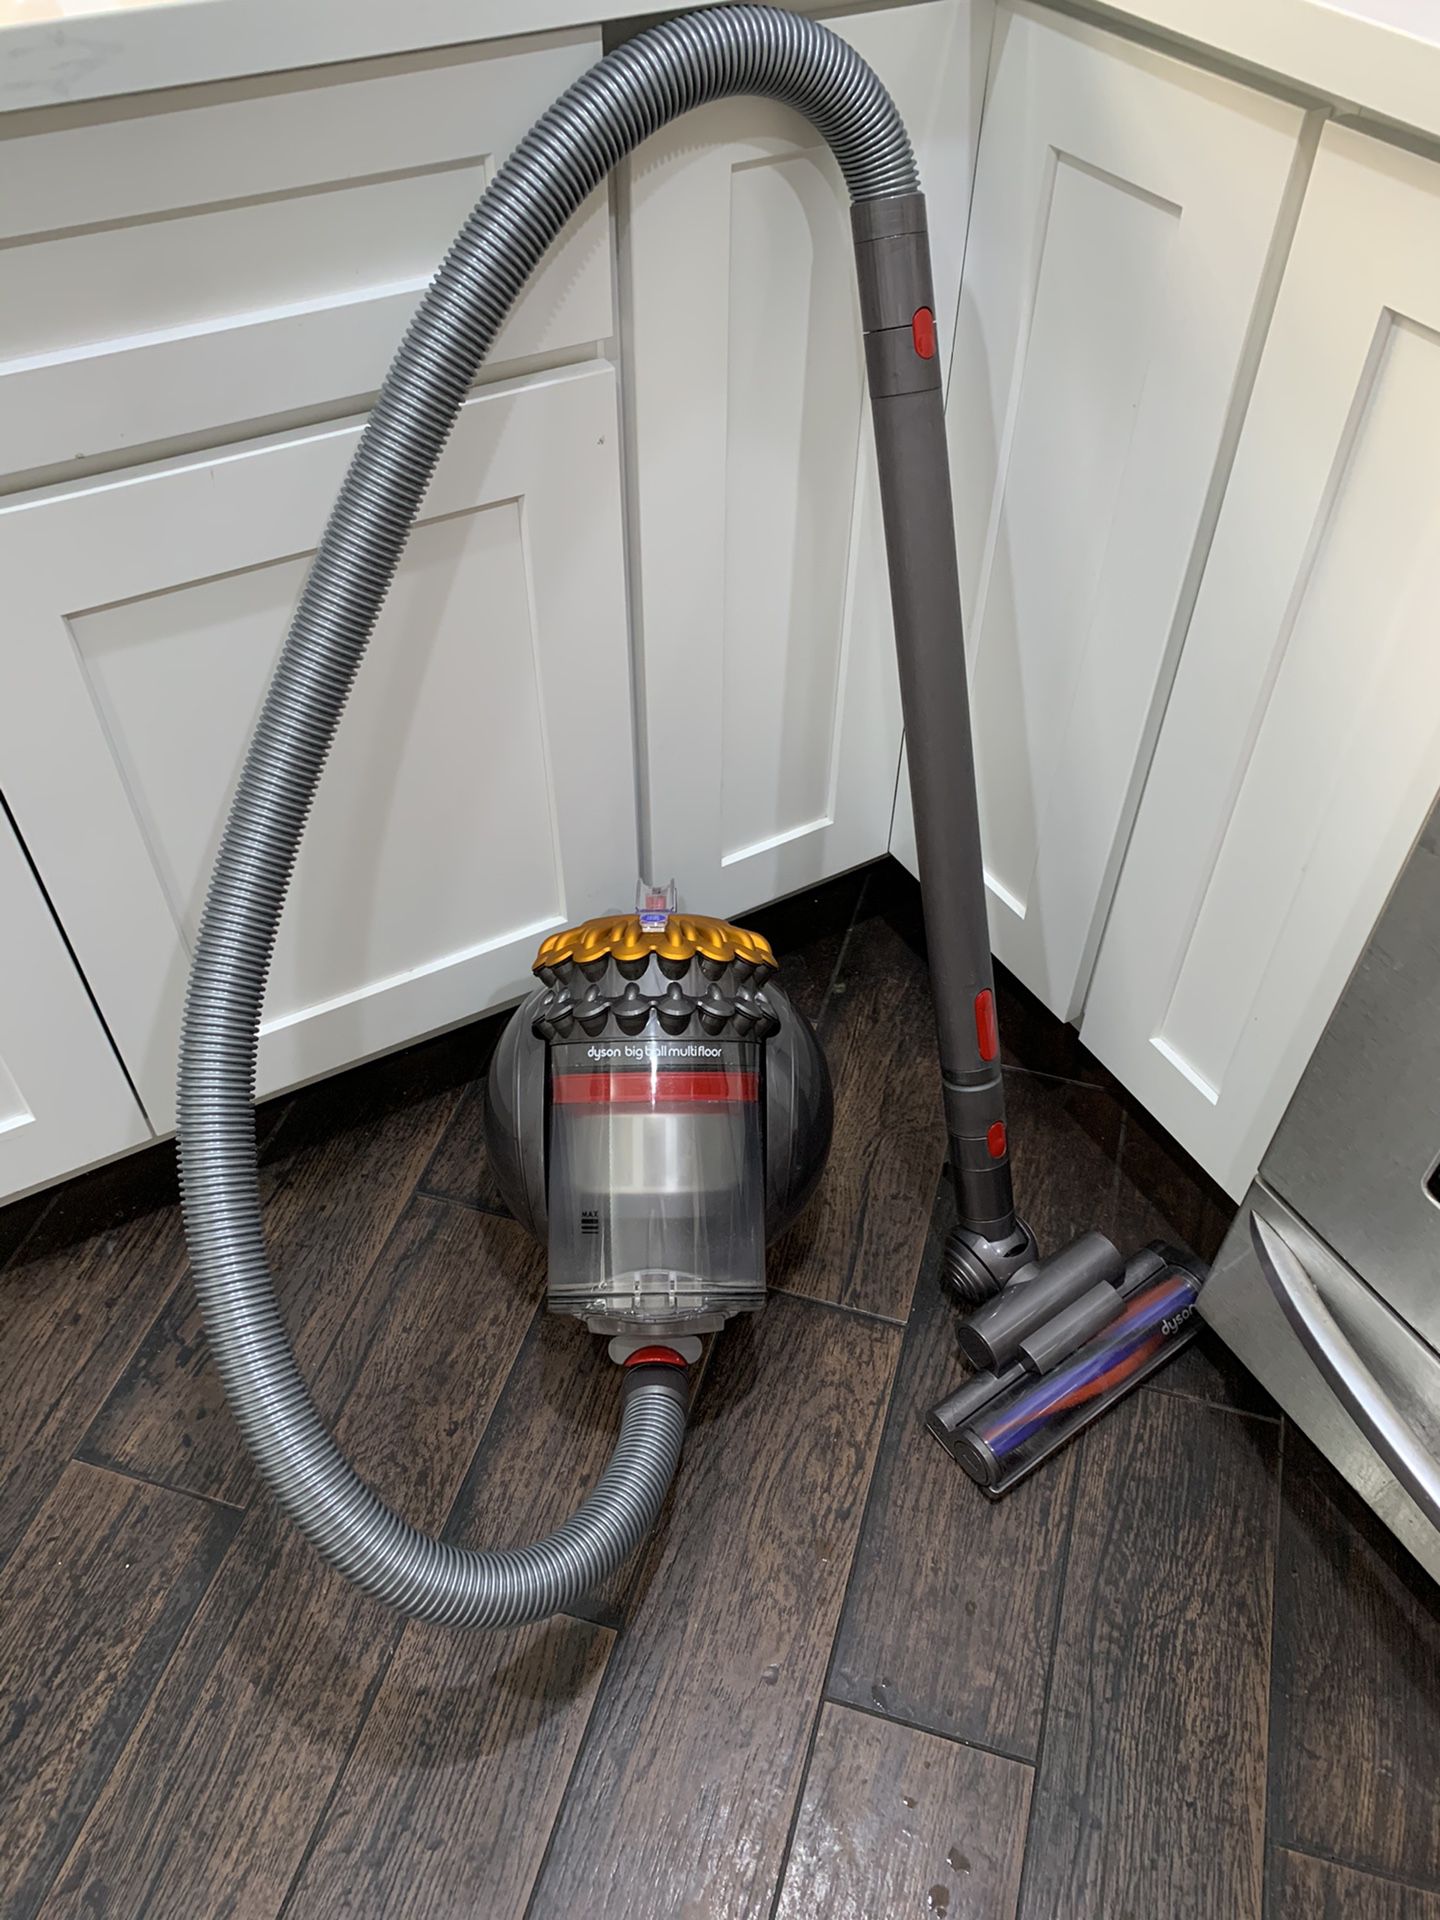 Dyson Big Ball Multifloor canister vacuum cleaner